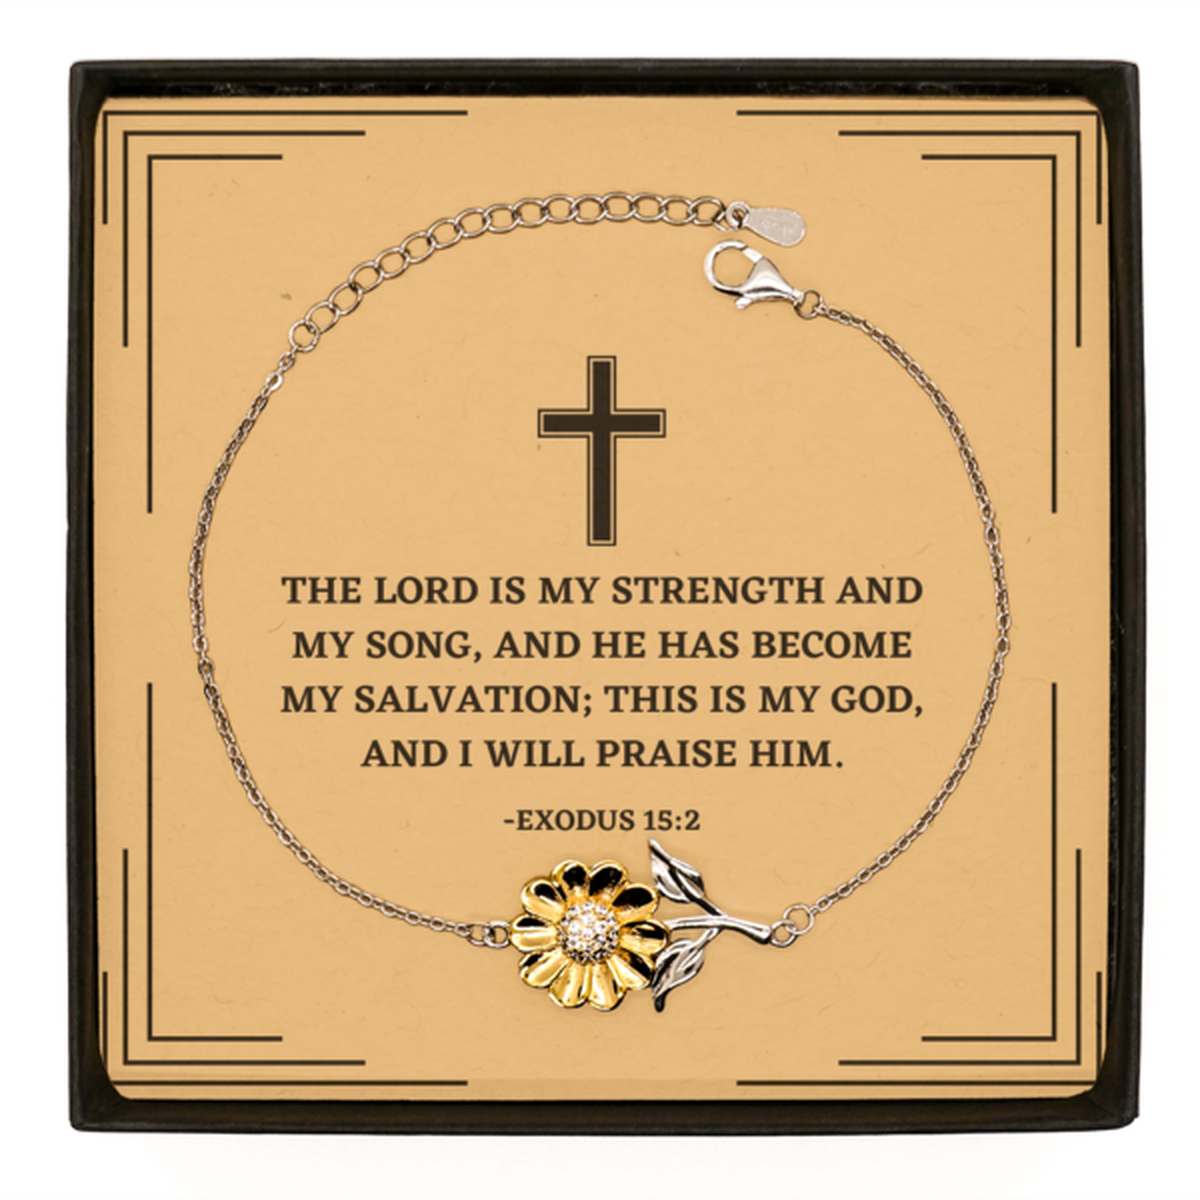 Baptism Gifts For Teenage Boys Girls, Christian Bible Verse Sterling Silver Sunflower Bracelet, The Lord is my strength, Confirmation Gifts, Bible Verse Card for Son, Godson, Grandson